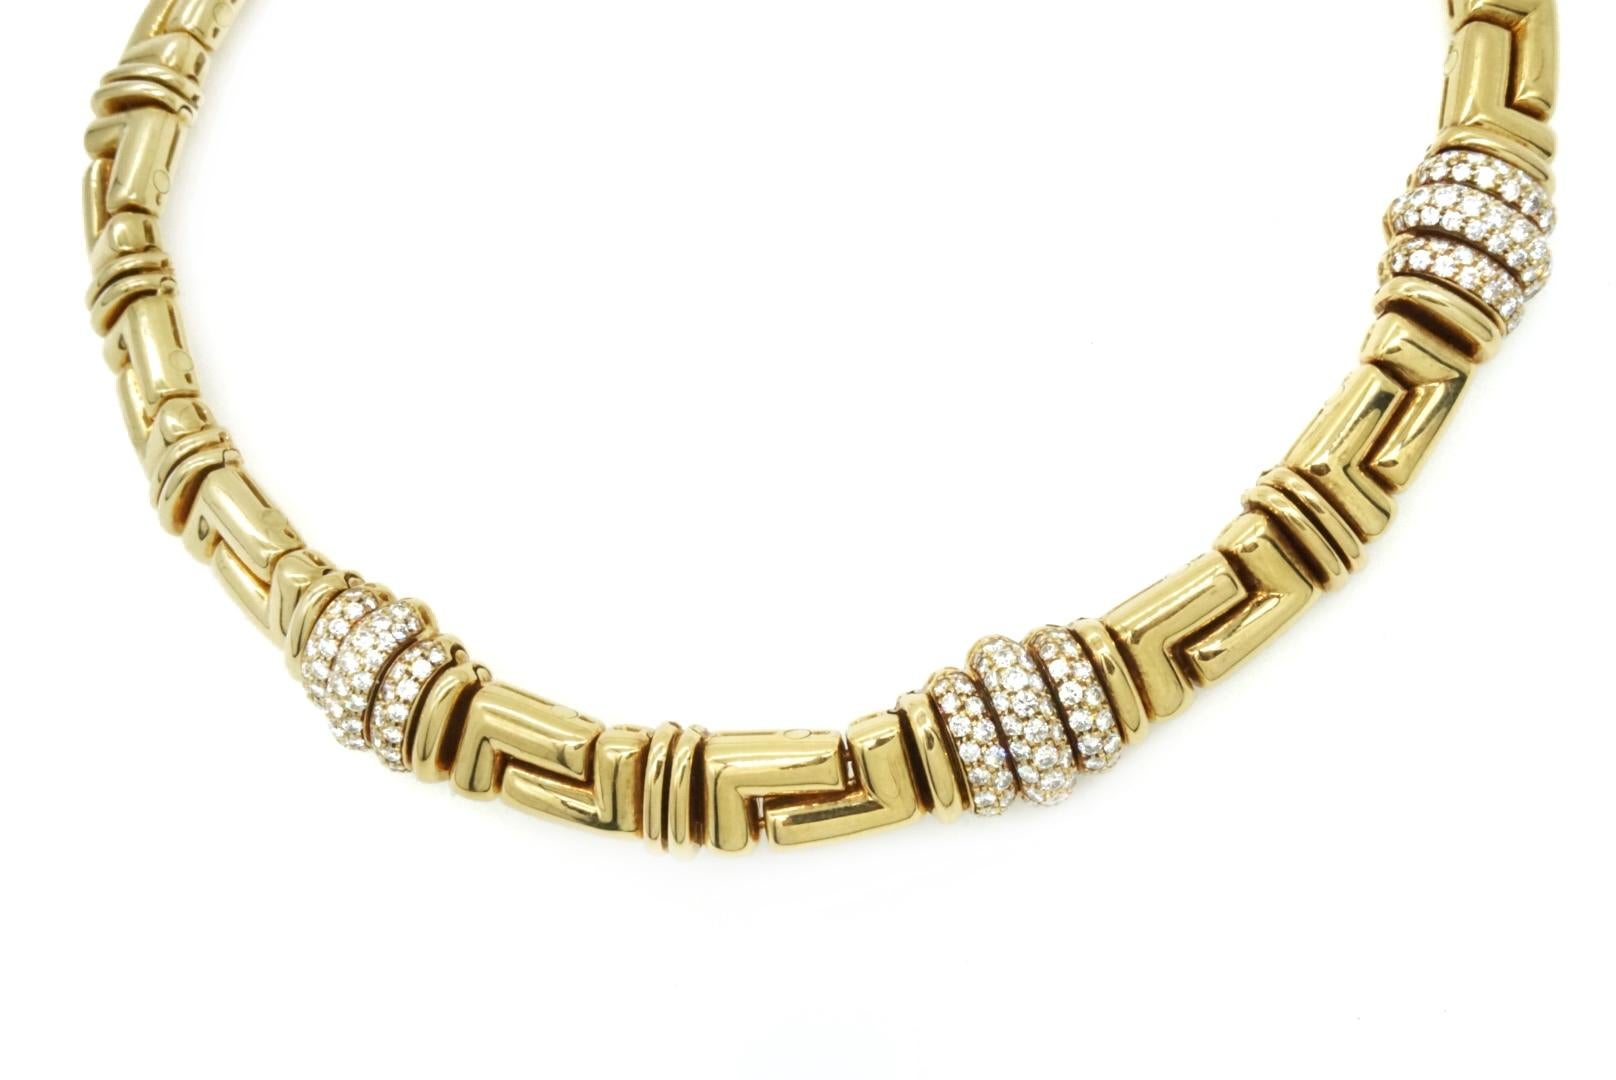 Bulgari 18k Gold and Diamond Necklace In Excellent Condition For Sale In New York, NY